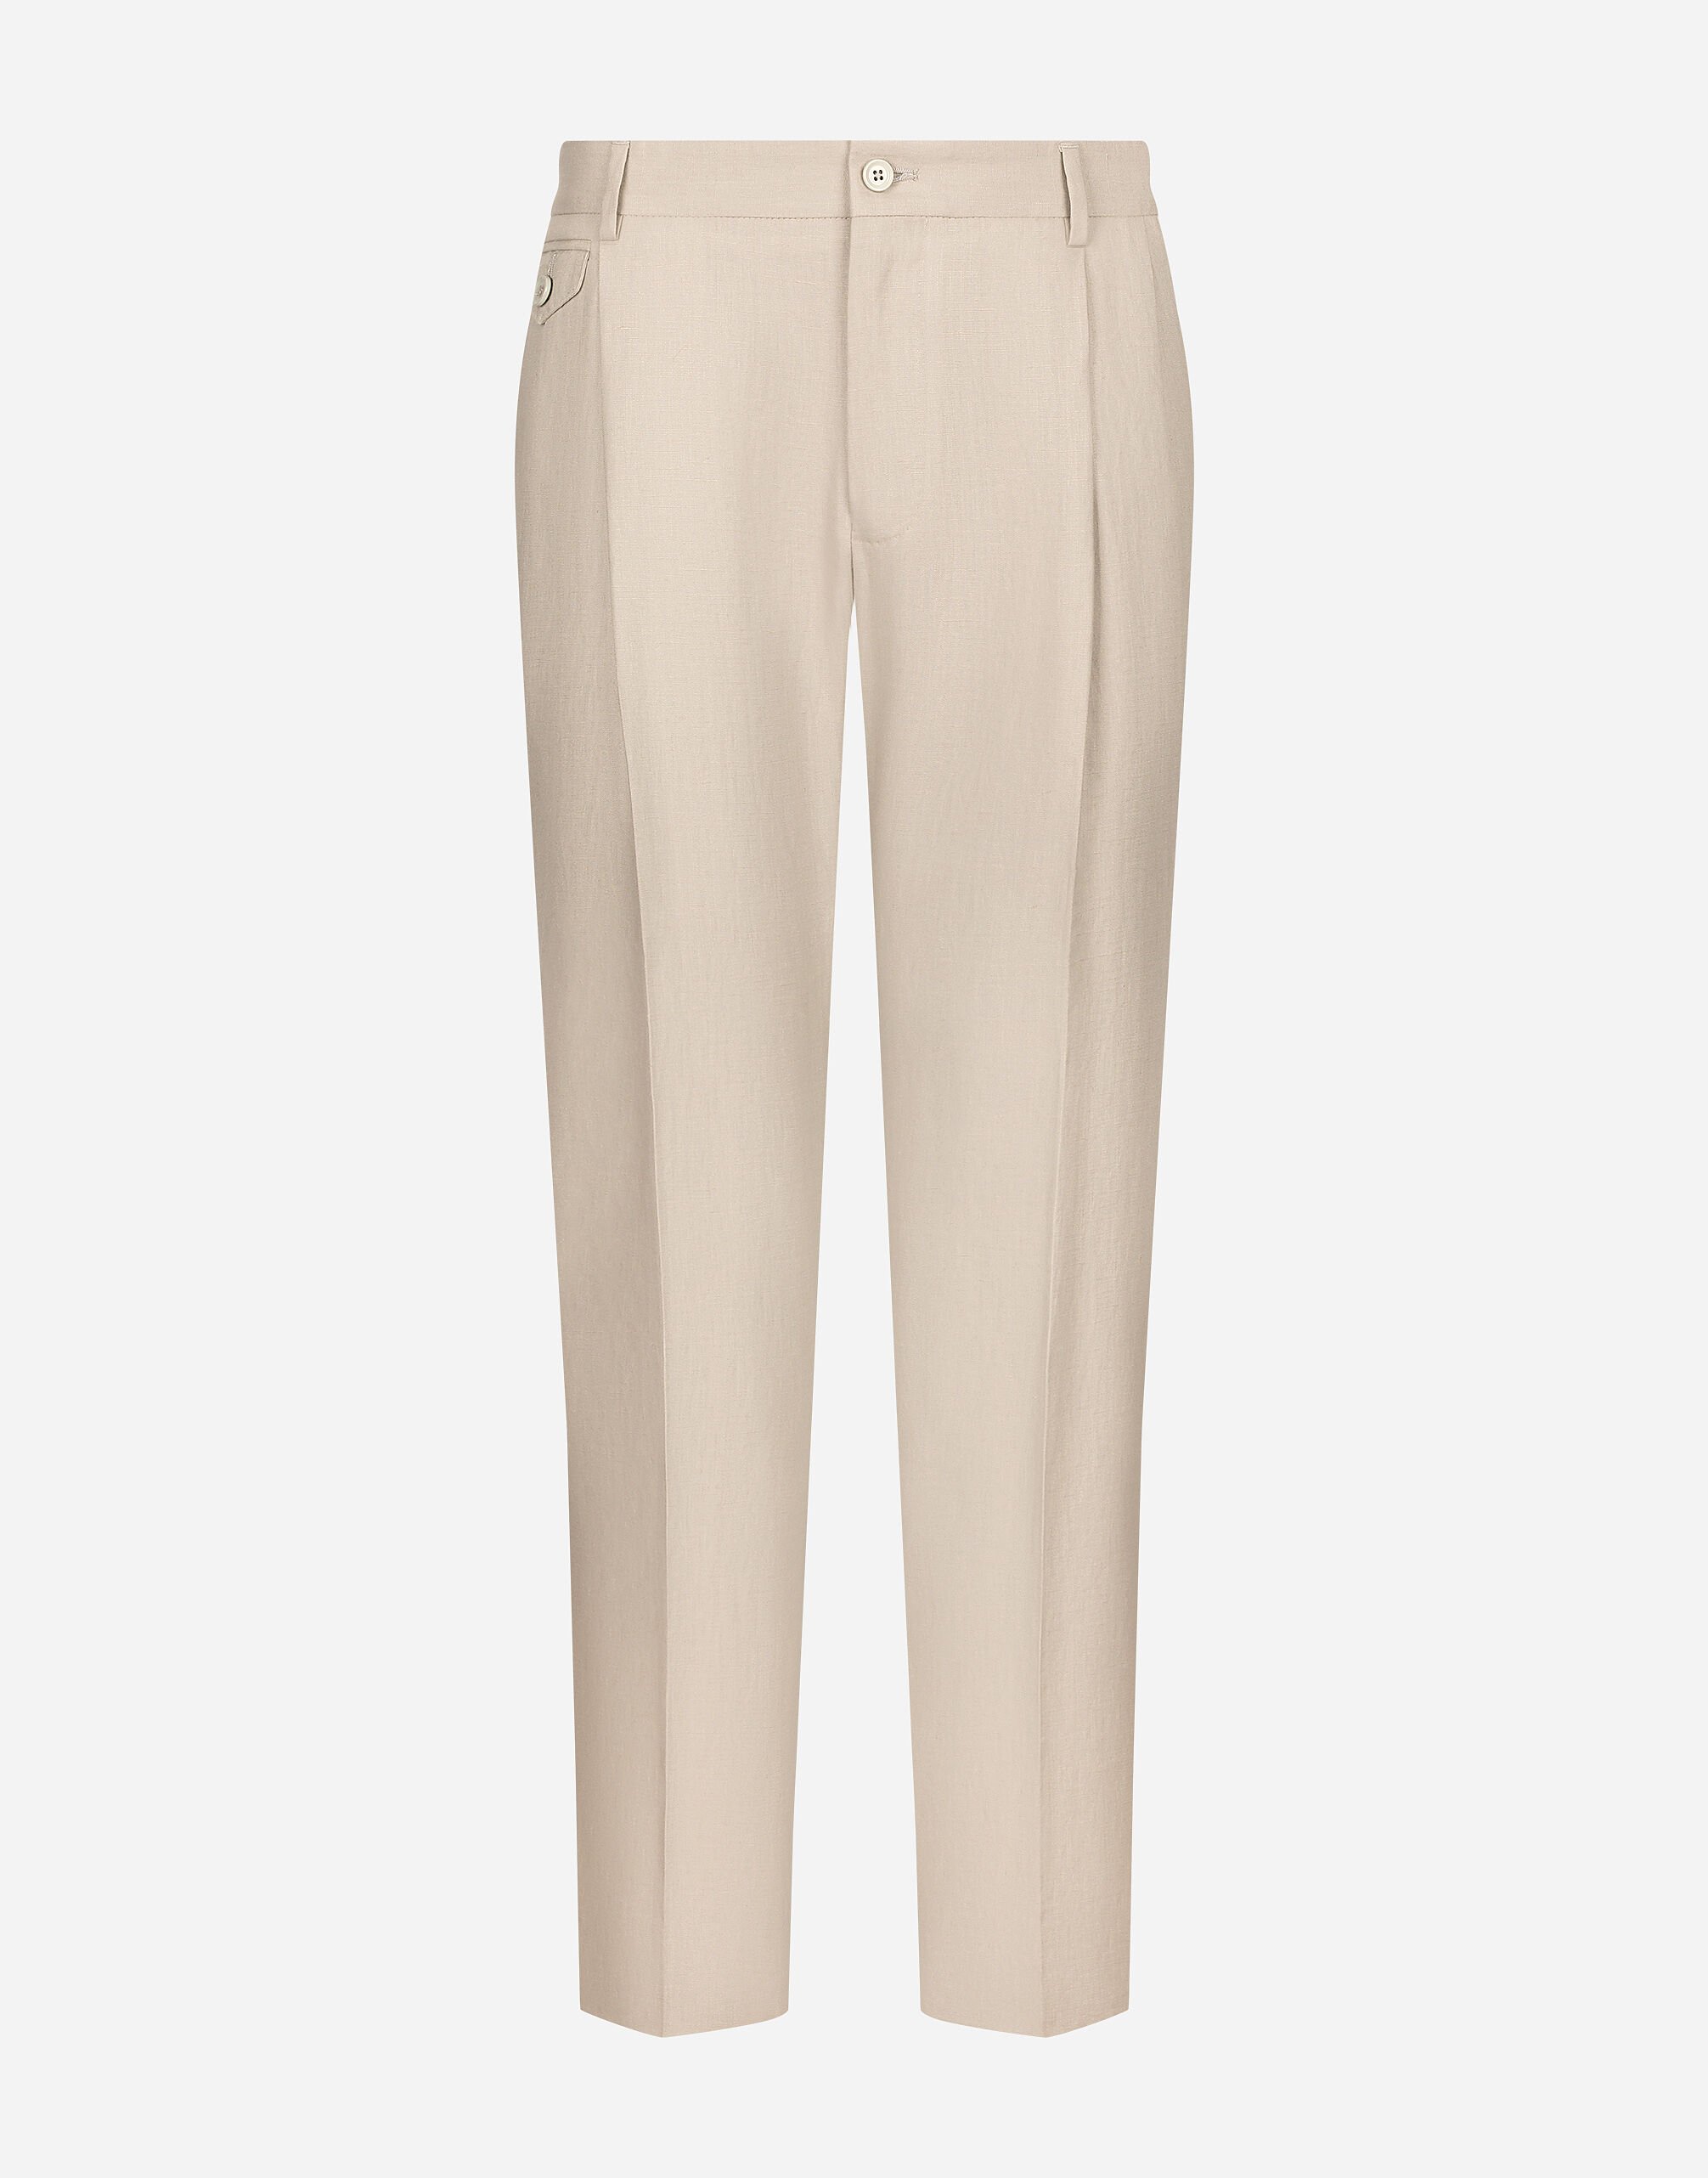 ${brand} Linen pants with stretch waistband ${colorDescription} ${masterID}